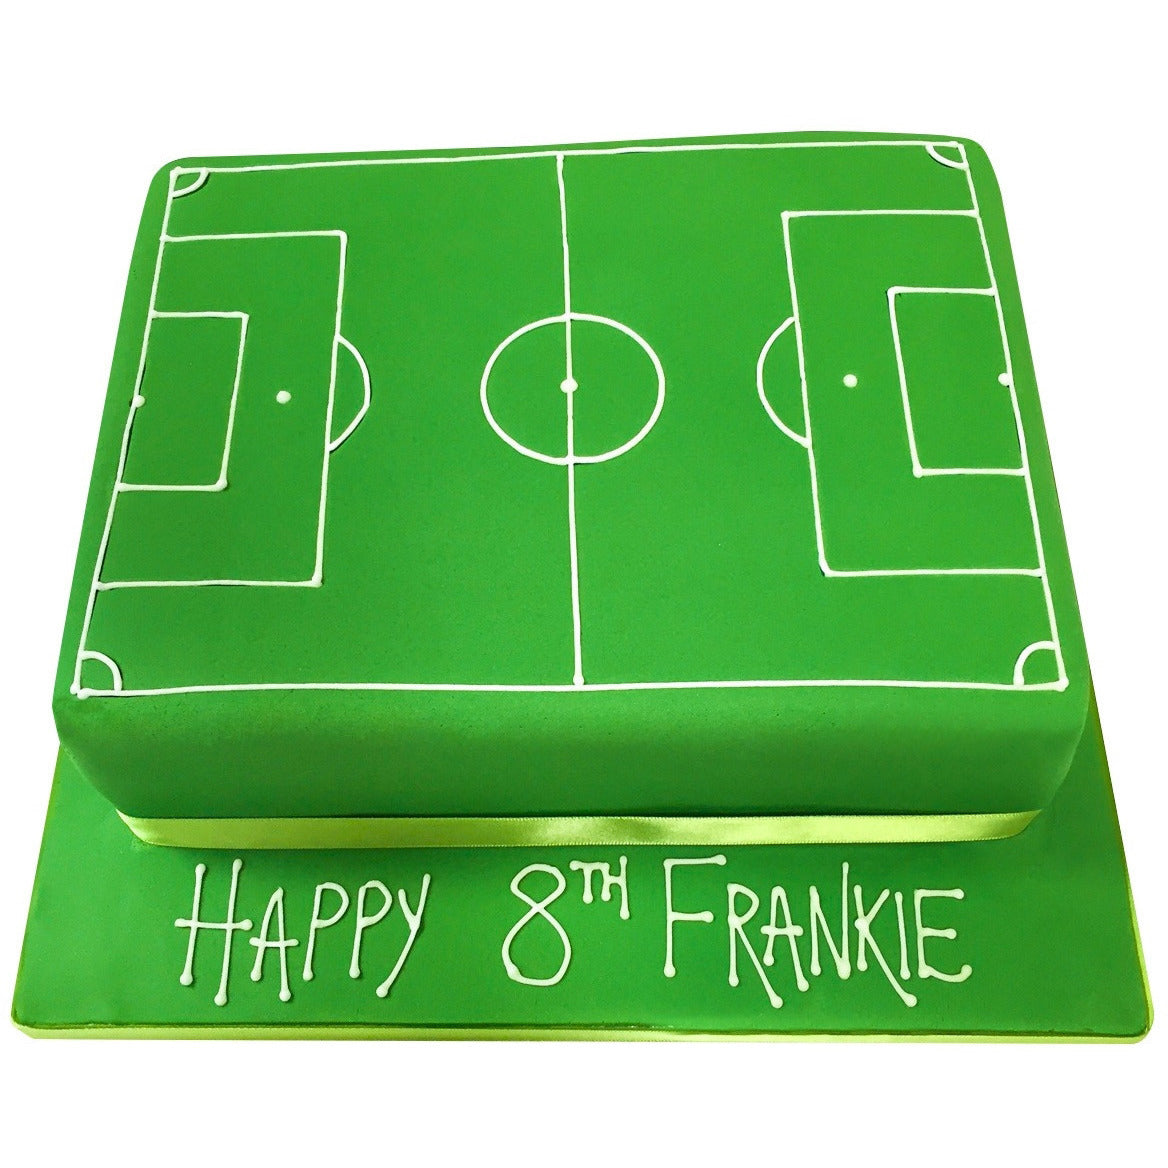 30 Cool Football Cakes And How to Make Your Own